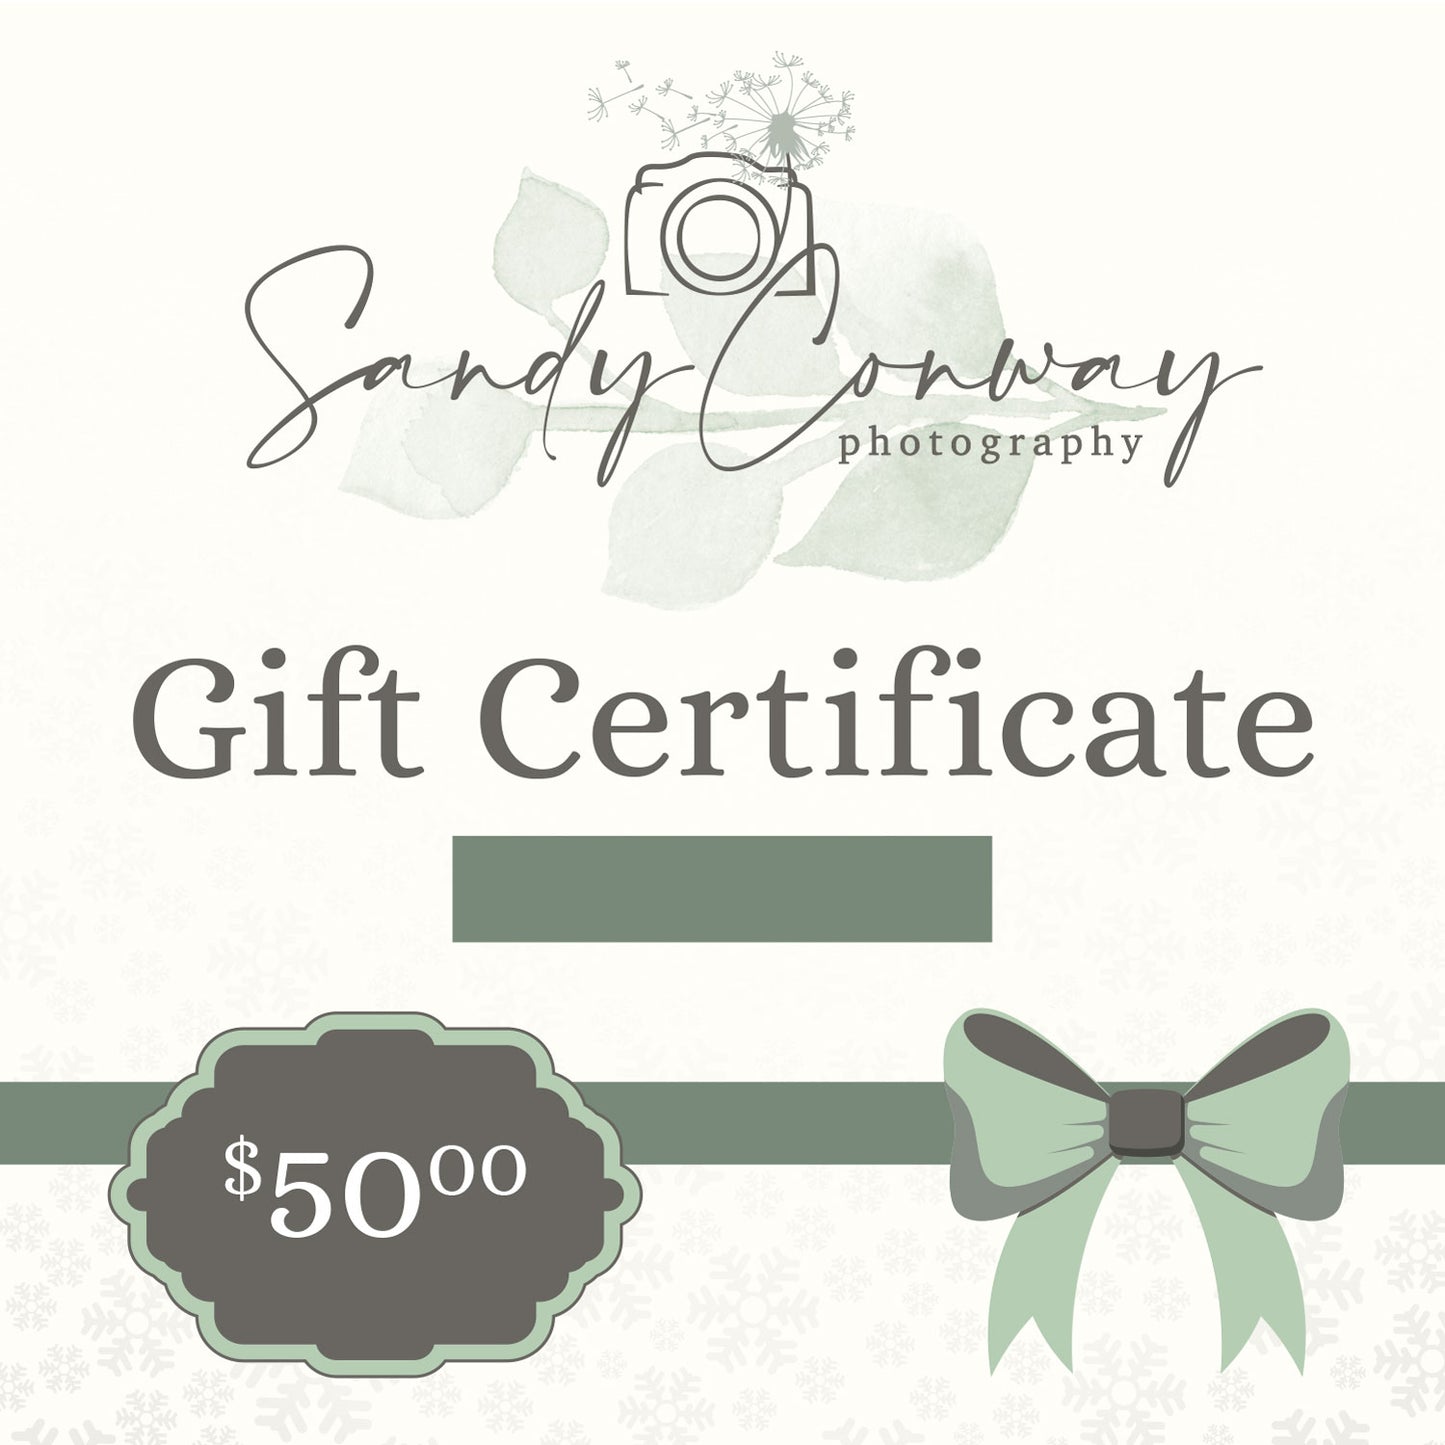 Sandy Conway Photography Gift Certificate